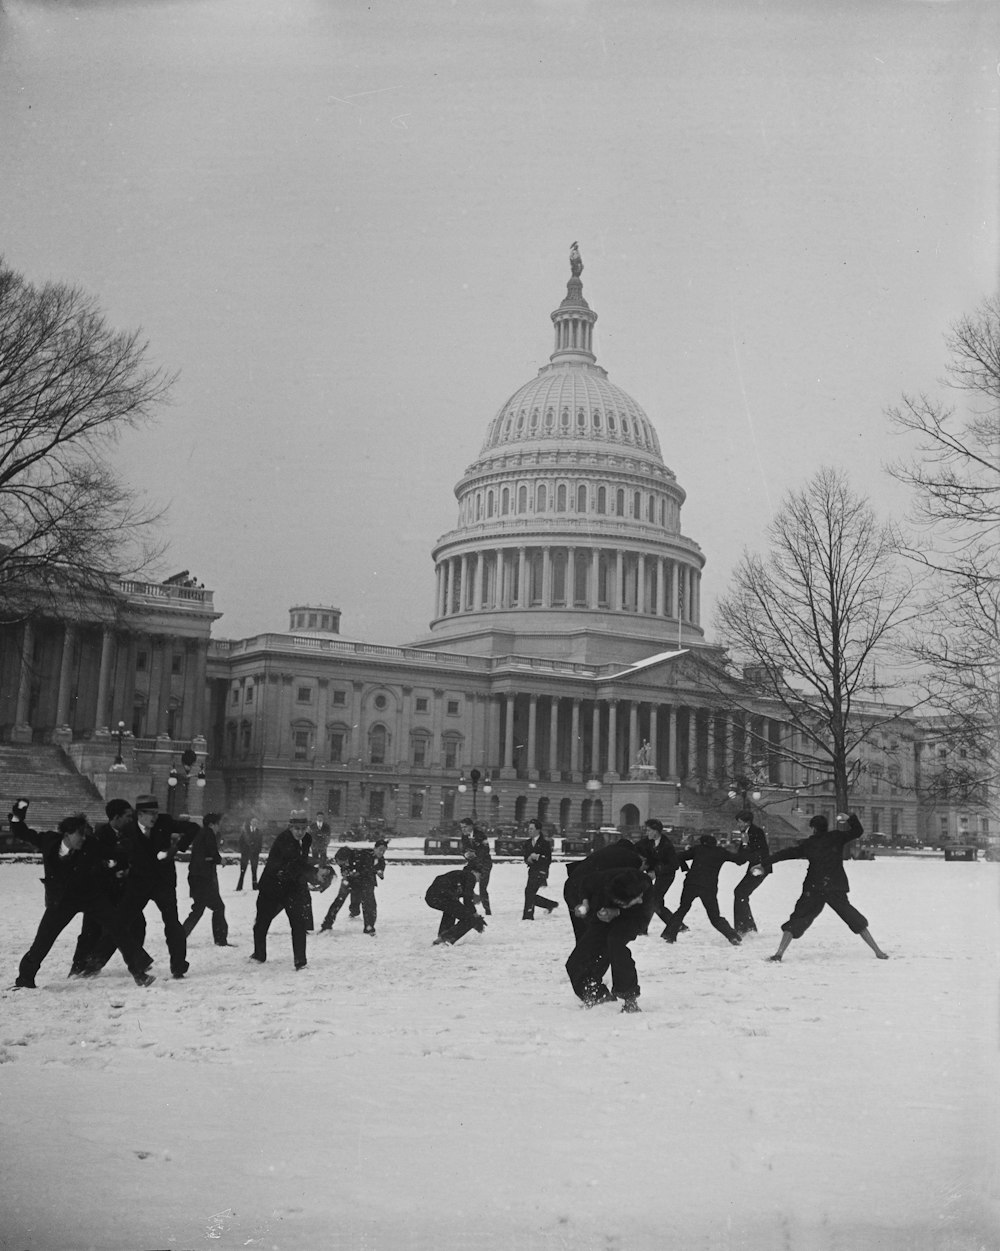 Snowball fight in front of U.S. Capitol, Washington, D.C